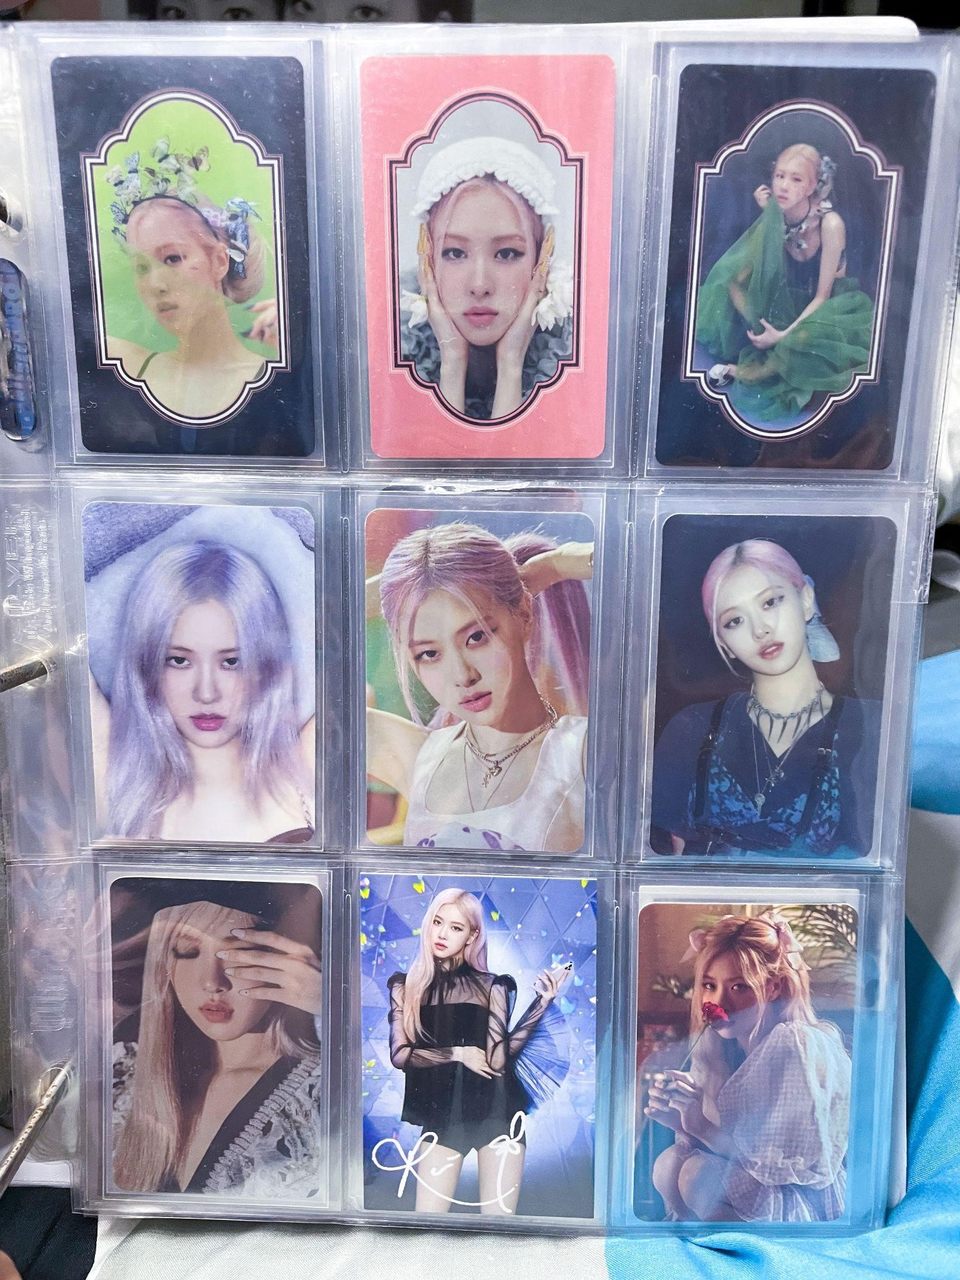 Why Do K-Pop Fans Buy Photo Cards?